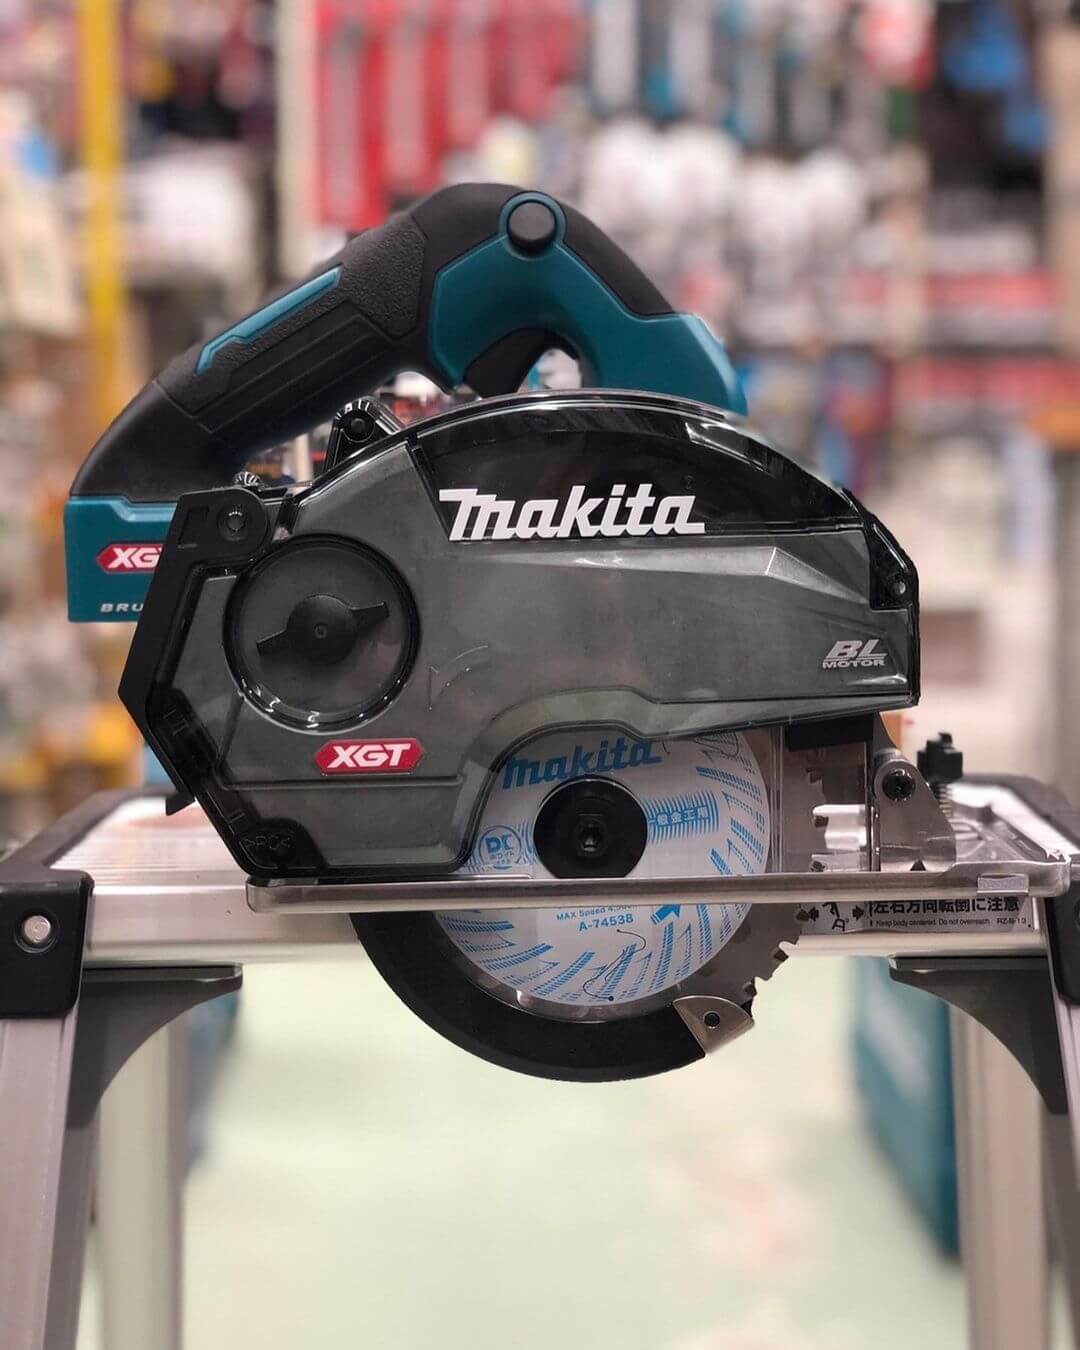 Which Is The Best Makita Cordless Circular Saw